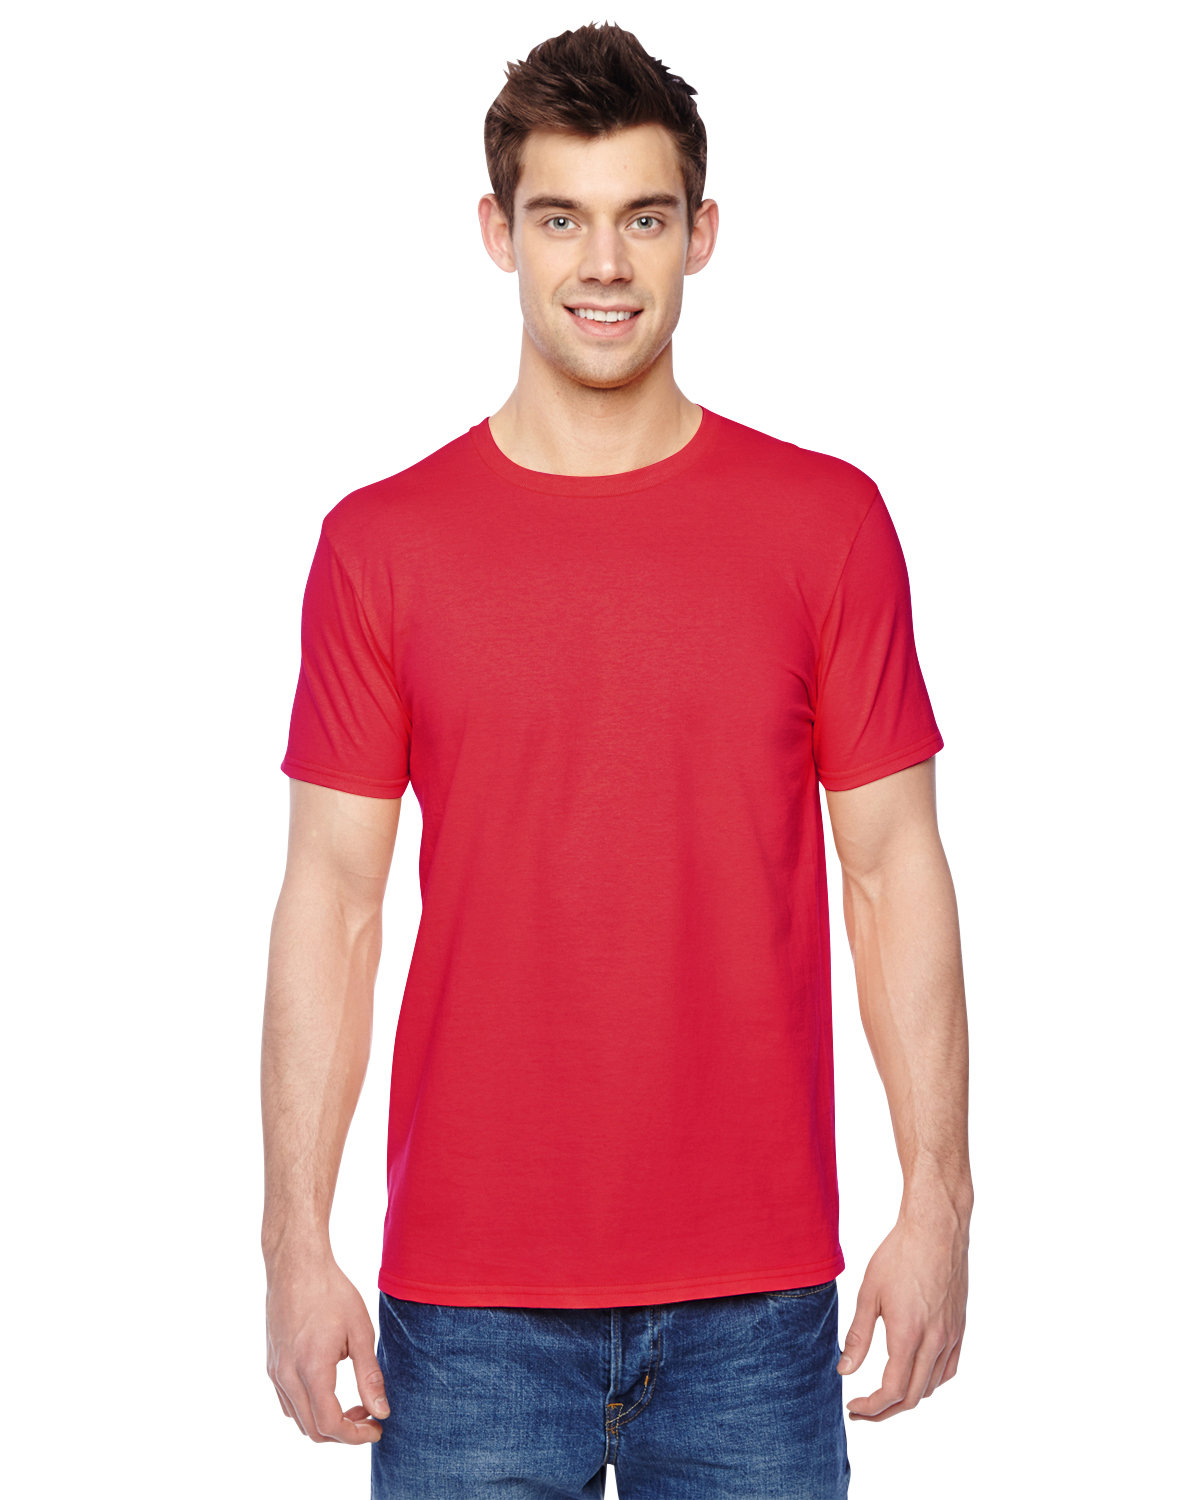 Fruit of the Loom Adult Sofspun® Jersey Crew T-Shirt FIERY RED 